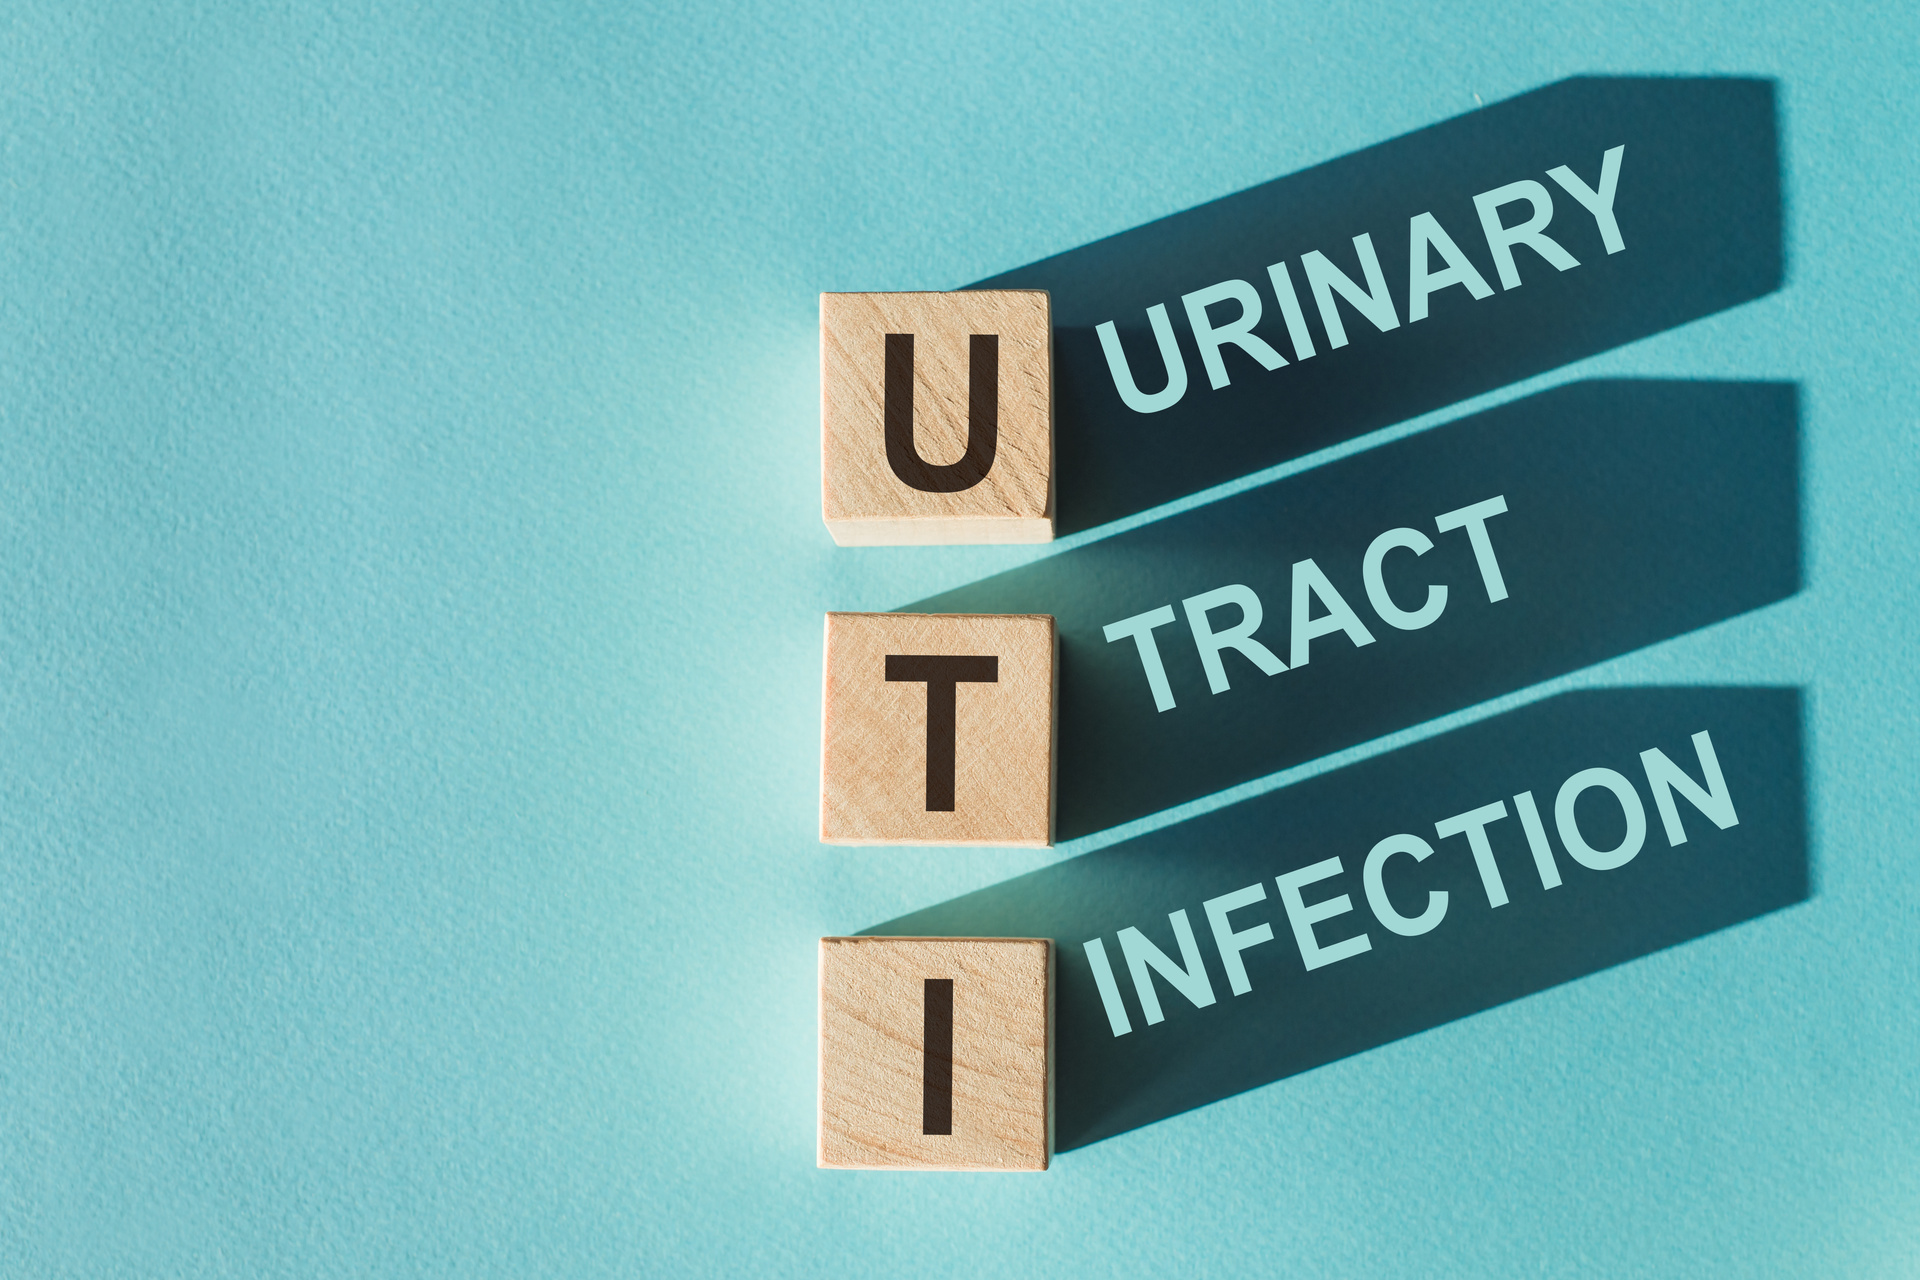 Image of letters making up UTI